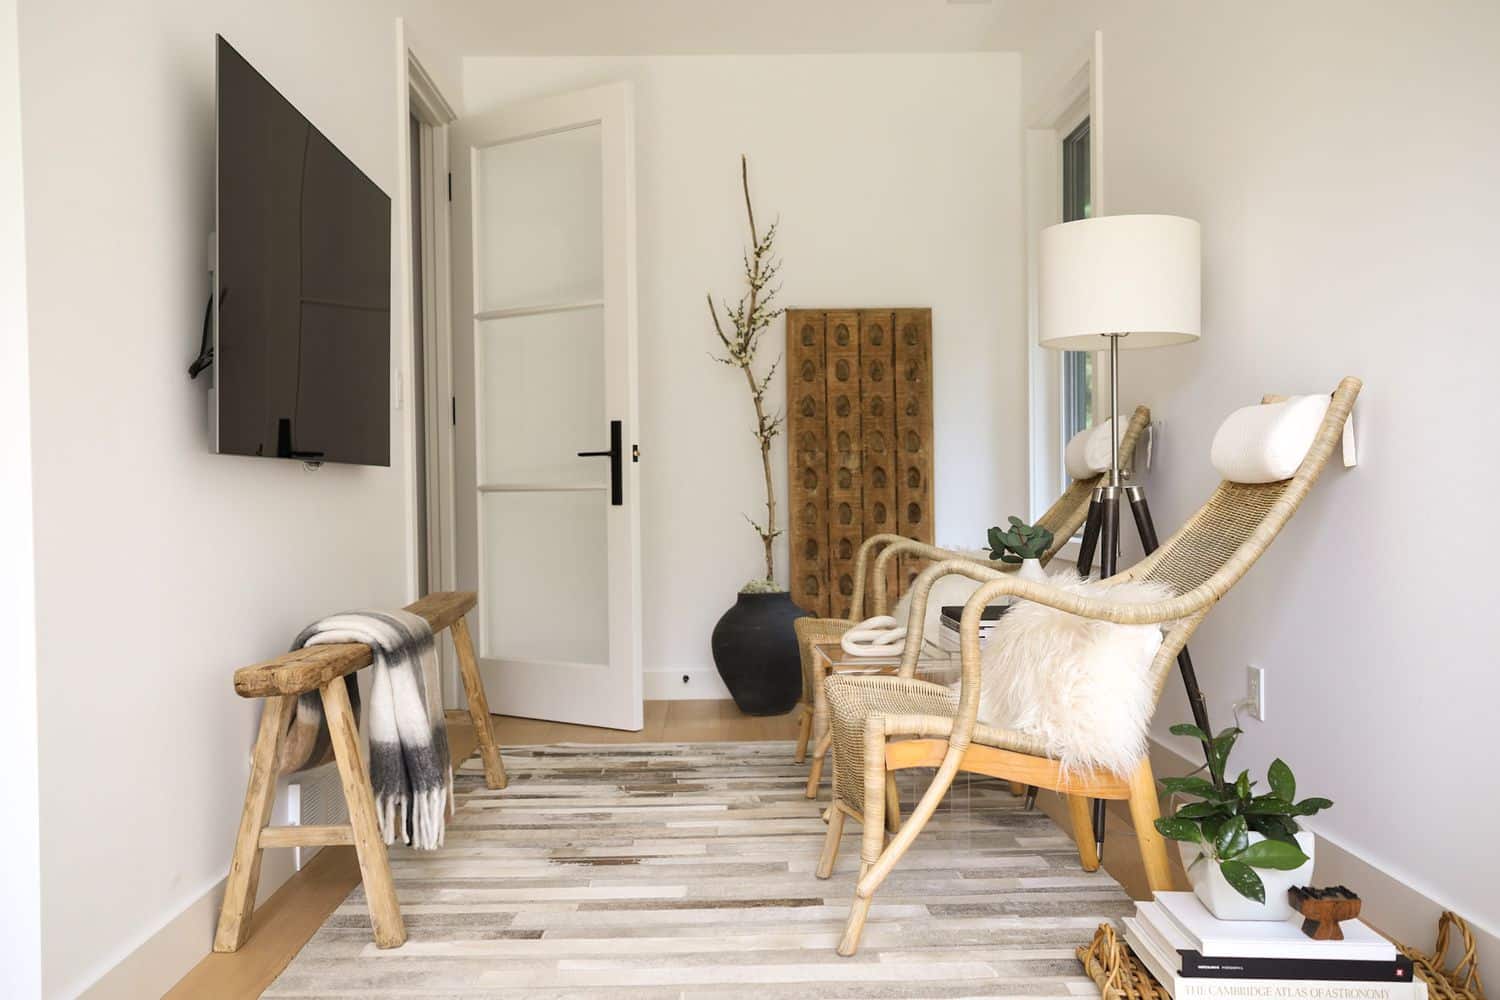 13 Ways to Make a Small Space Look Bigger